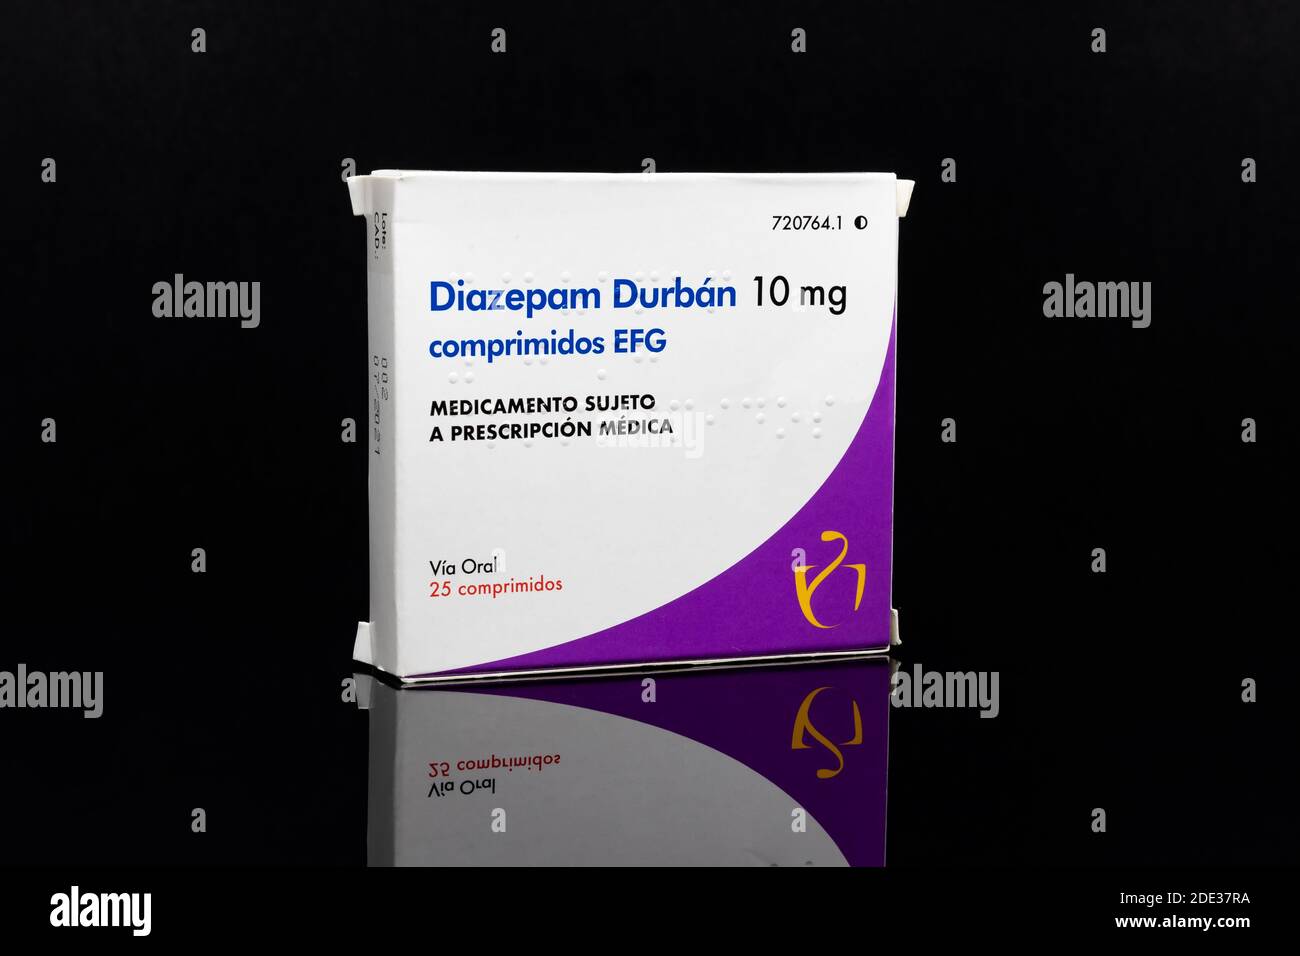 Huelva, Spain - November 26, 2020: Spanish Box of Diazepam brand Durbaan. Diazepam, first marketed as Valium, is a medicine of the benzodiazepine fami Stock Photo